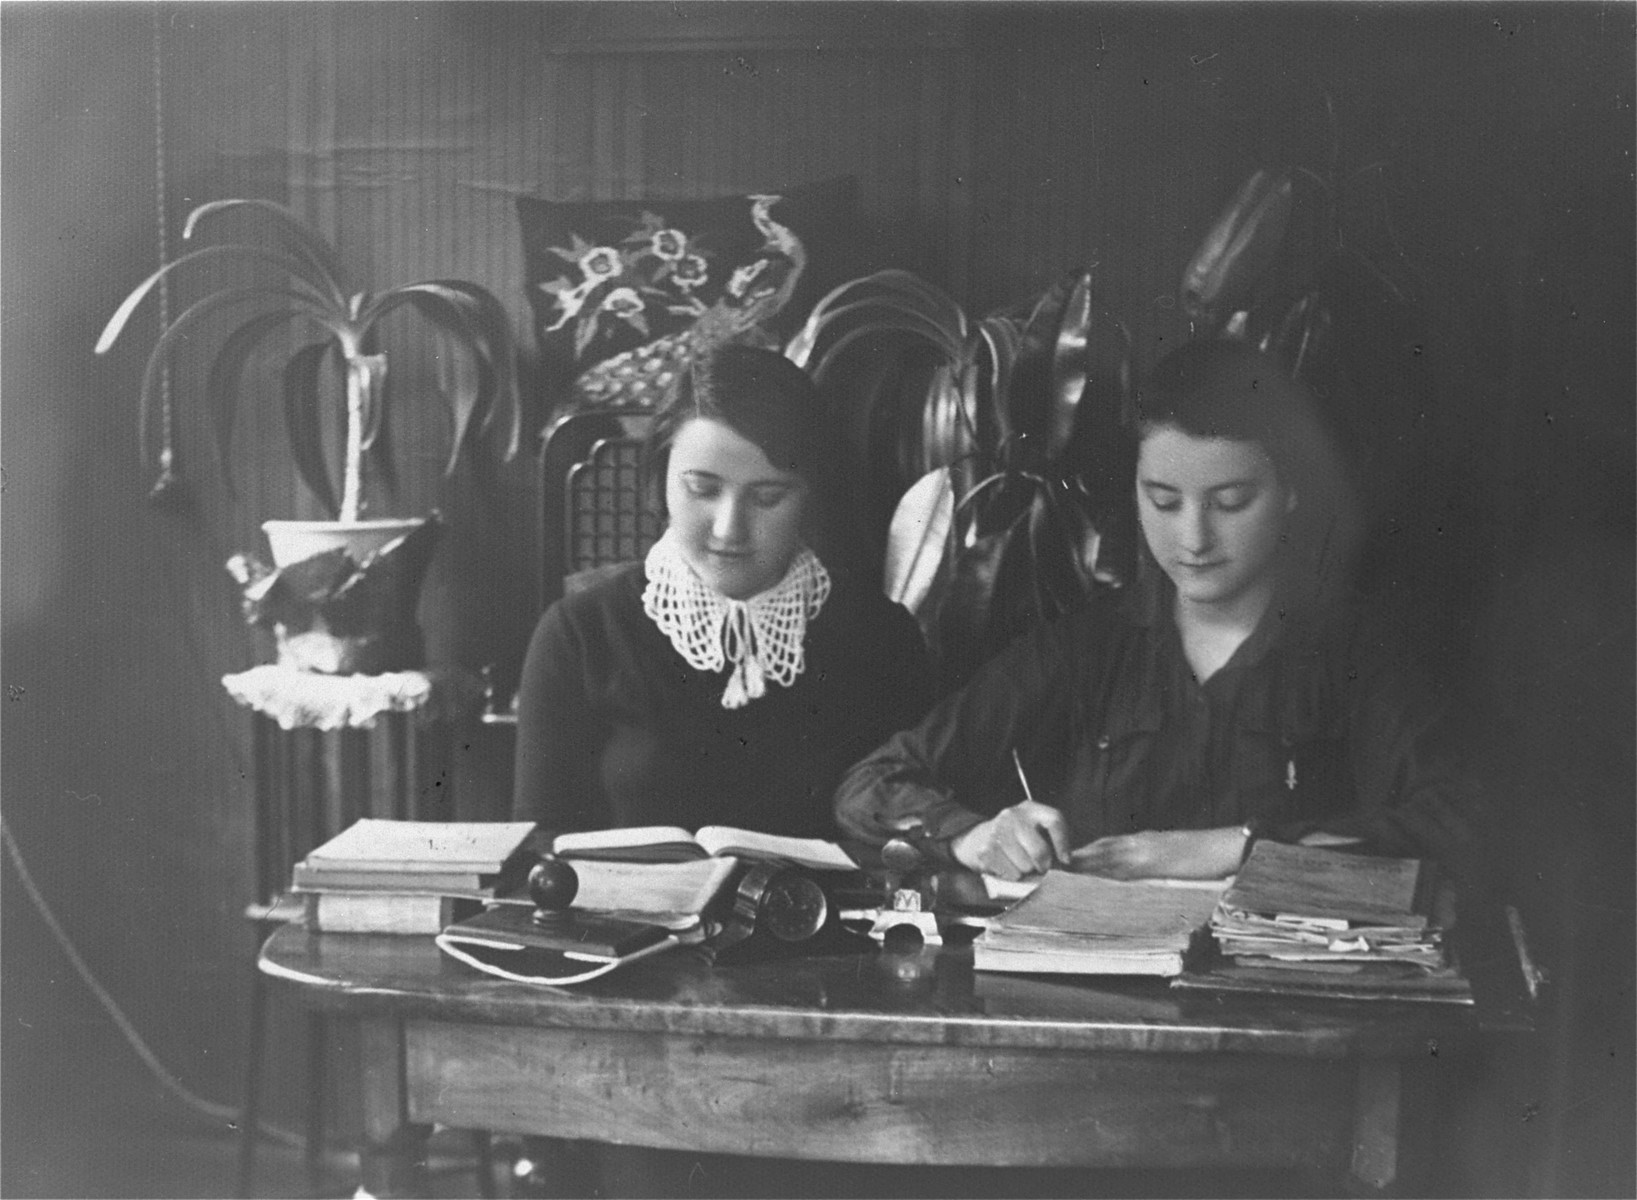 Two young women, who were members of the kibbutz hachshara Hakovesh, work as secretaries in an office.  

They inscribe the photograph to their friend Eliezer Kaplan: "In memory of the days that we spent together in kibbutz Hakovesh in Taurage..."